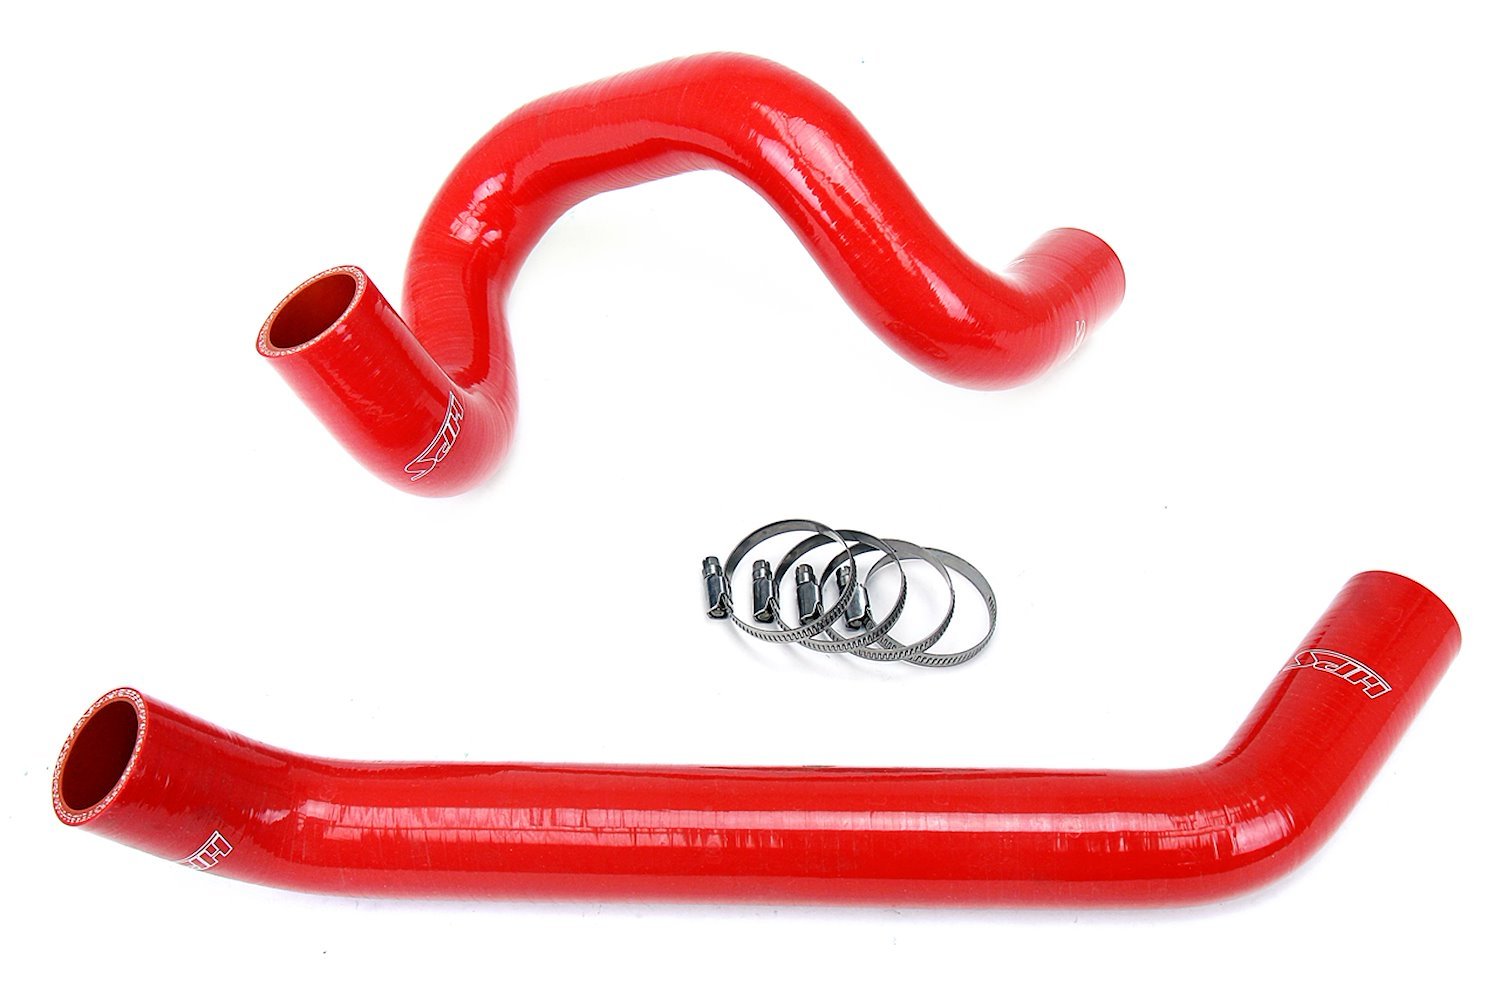 57-1220R-RED Radiator Hose Kit, High-Temp 3-Ply Reinforced Silicone, Replace OEM Rubber Radiator Coolant Hoses